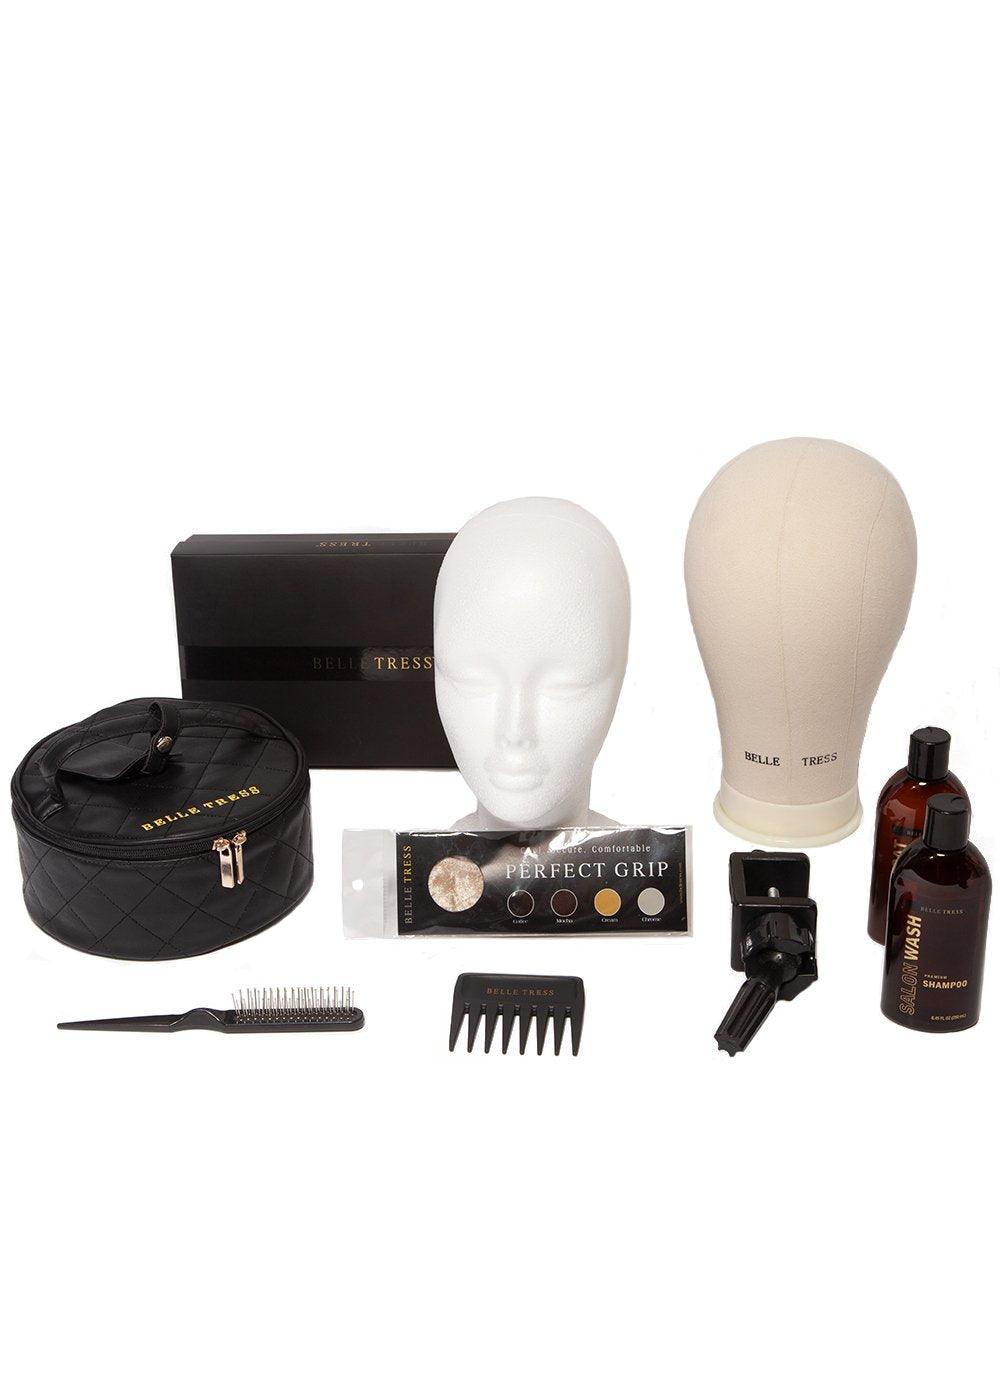 Deluxe Essential Care Kit by Belle Tress